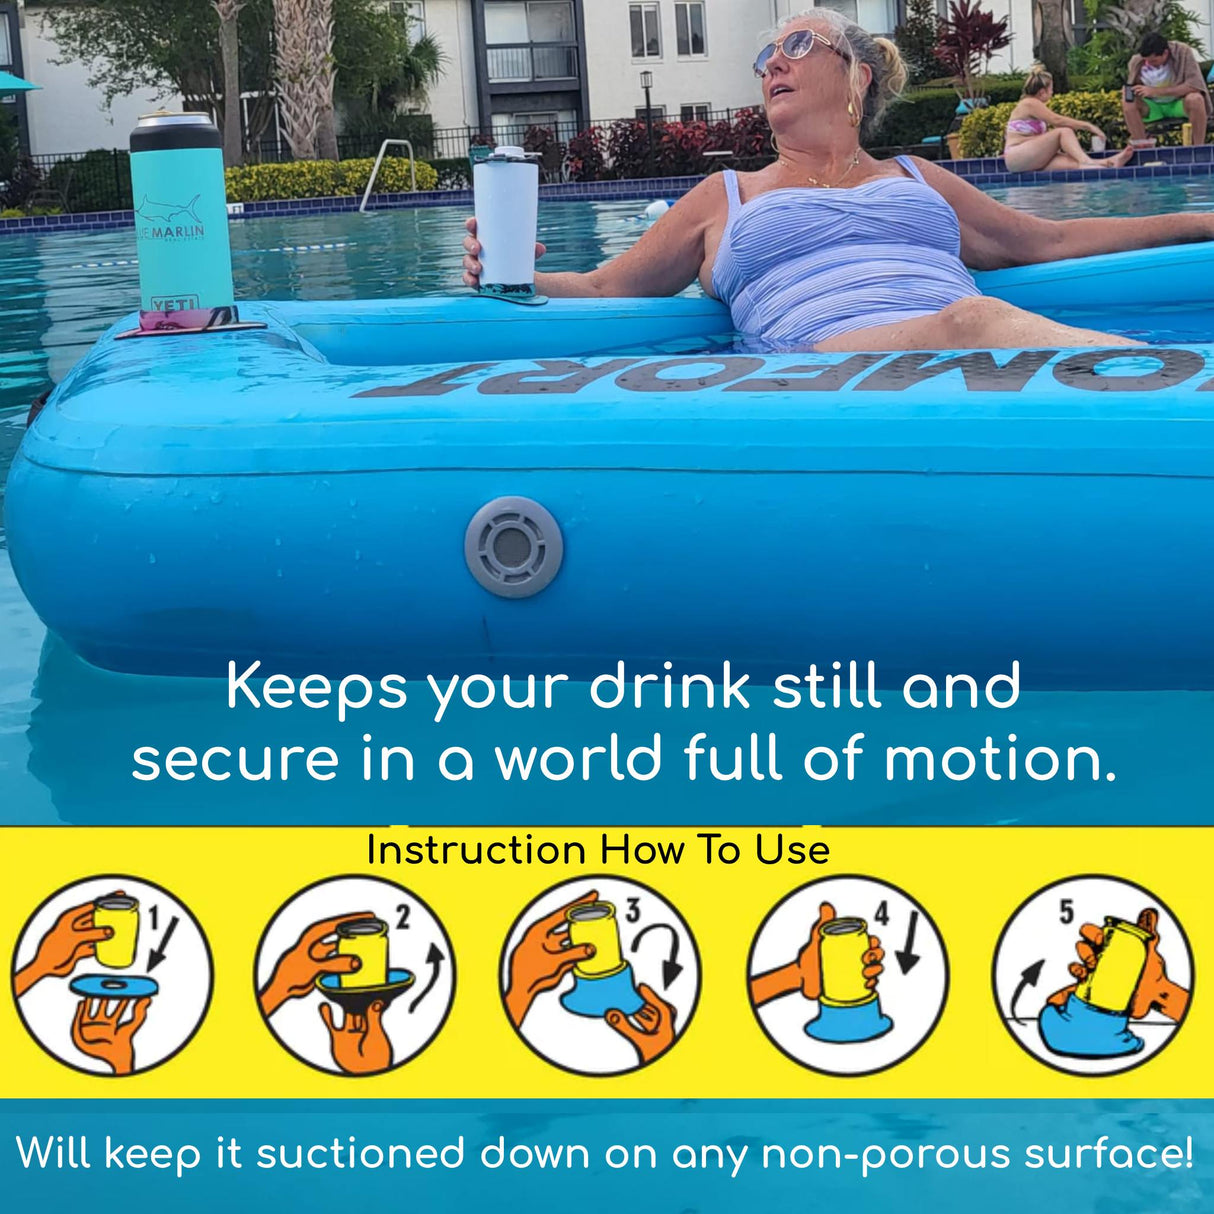 Sun In Comfort cup holders also fits on paddle boards, Water floats